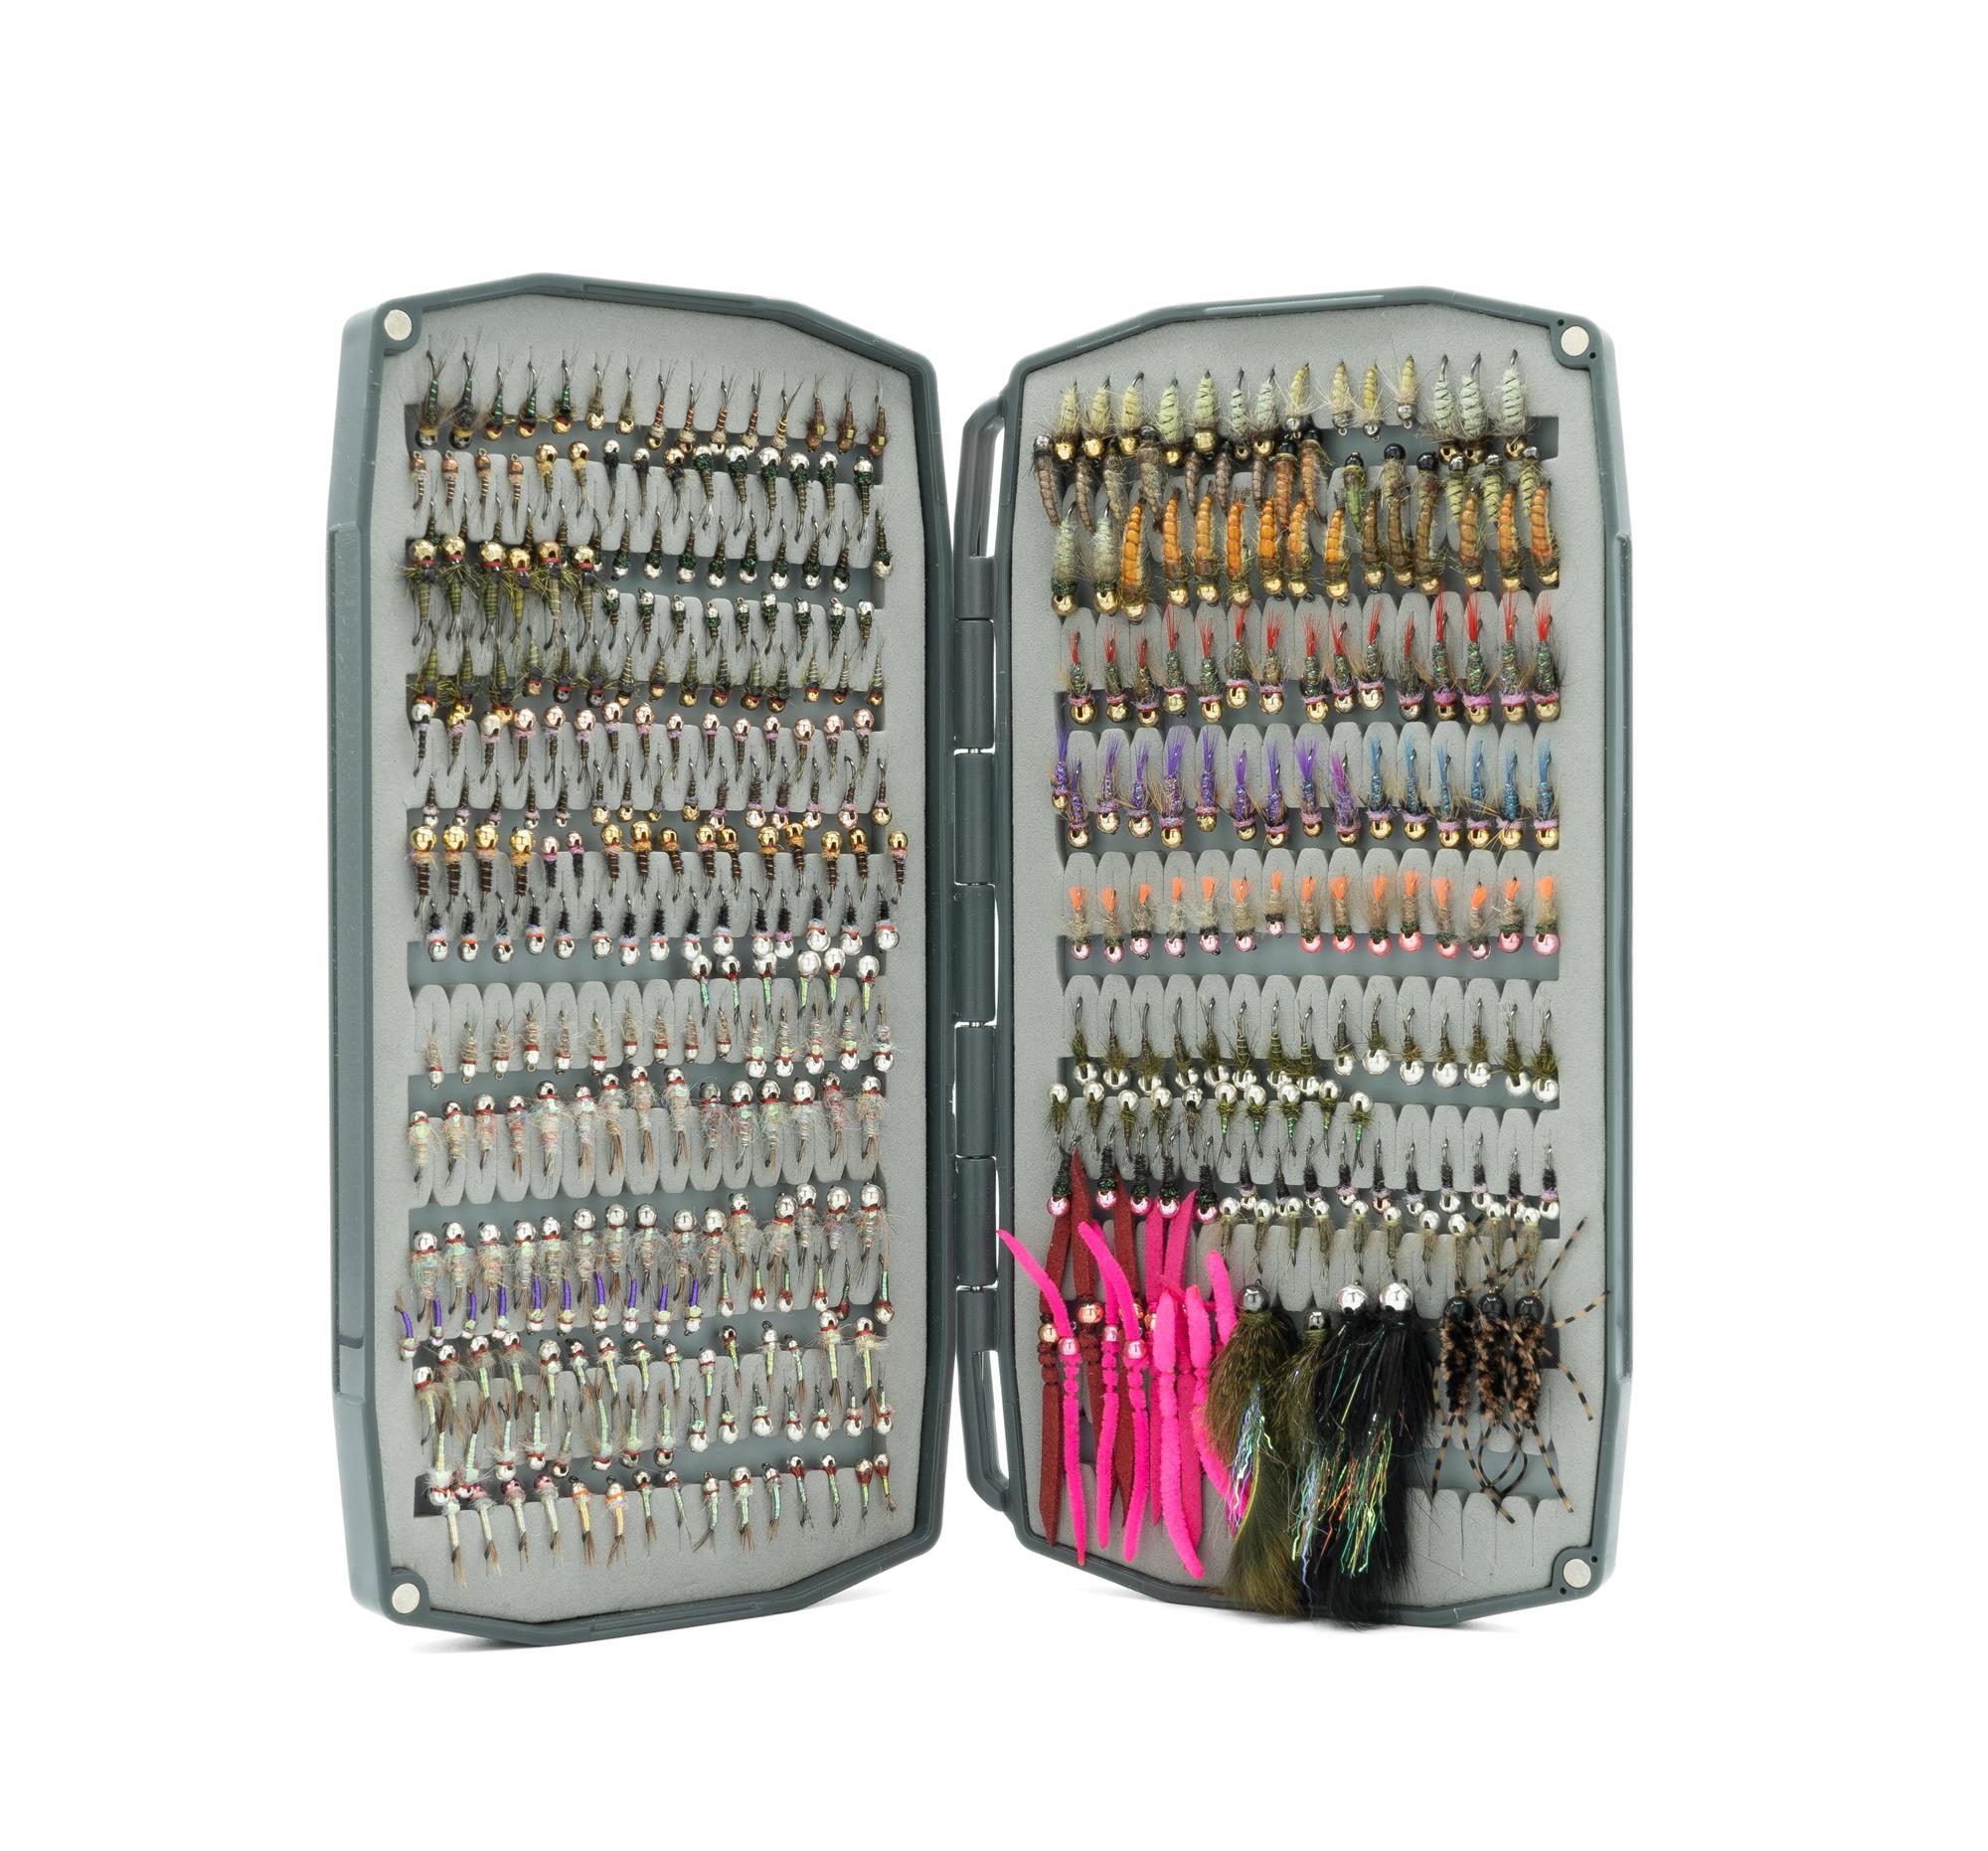 https://www.theflyfishers.com/Content/files/Umpqua/FlyBoxes/30088/Loaded.jpg